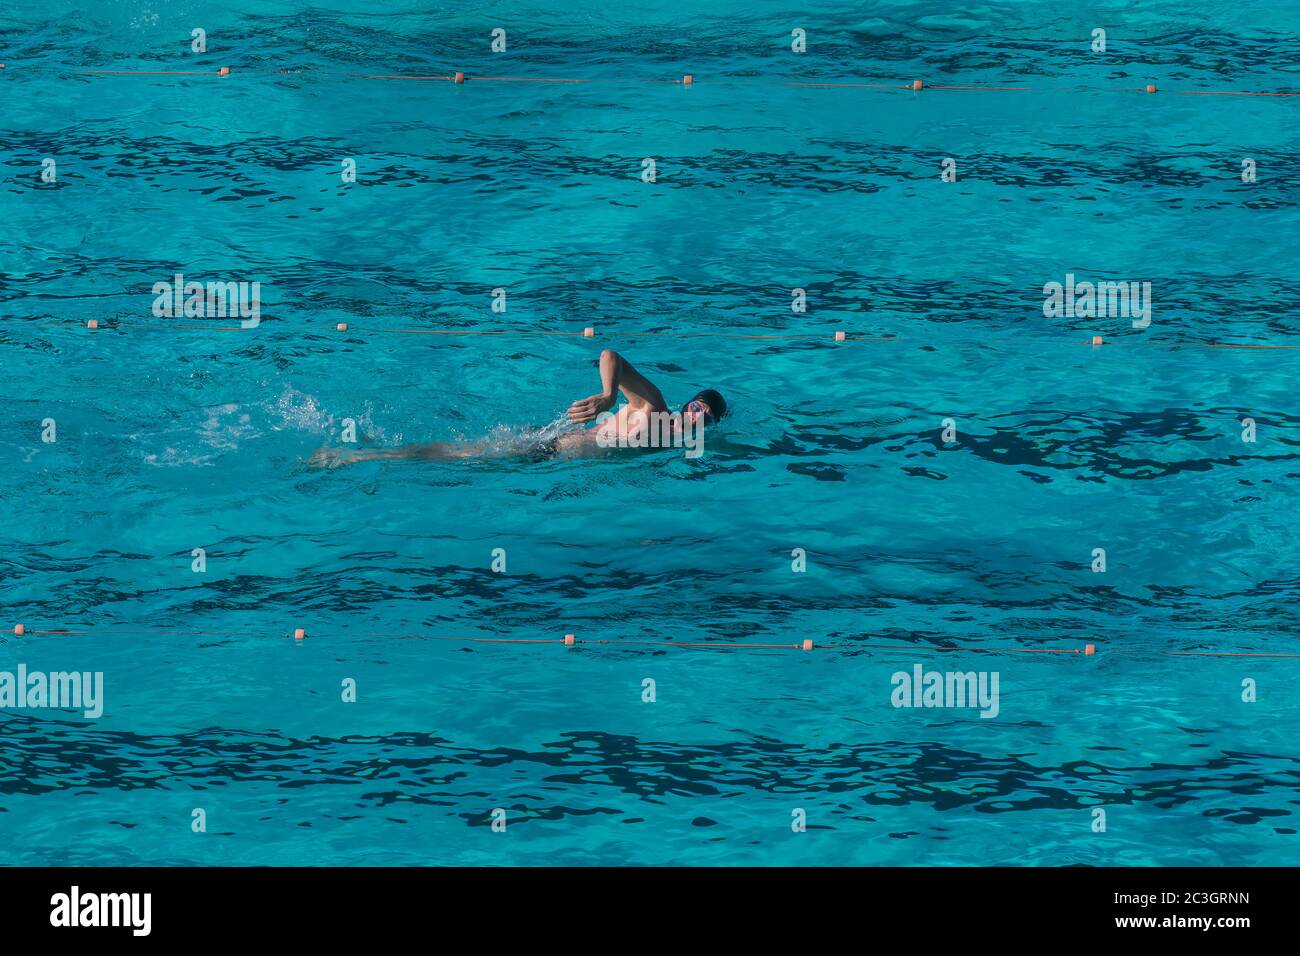 Sydney, Australia. Saturday 20th June 2020. The Bondi Icebergs Pool first weekened opened since coronavirus restrictions have been eased in Sydney's eastern suburbs.Credit Paul Lovelace/Alamy Live News Stock Photo